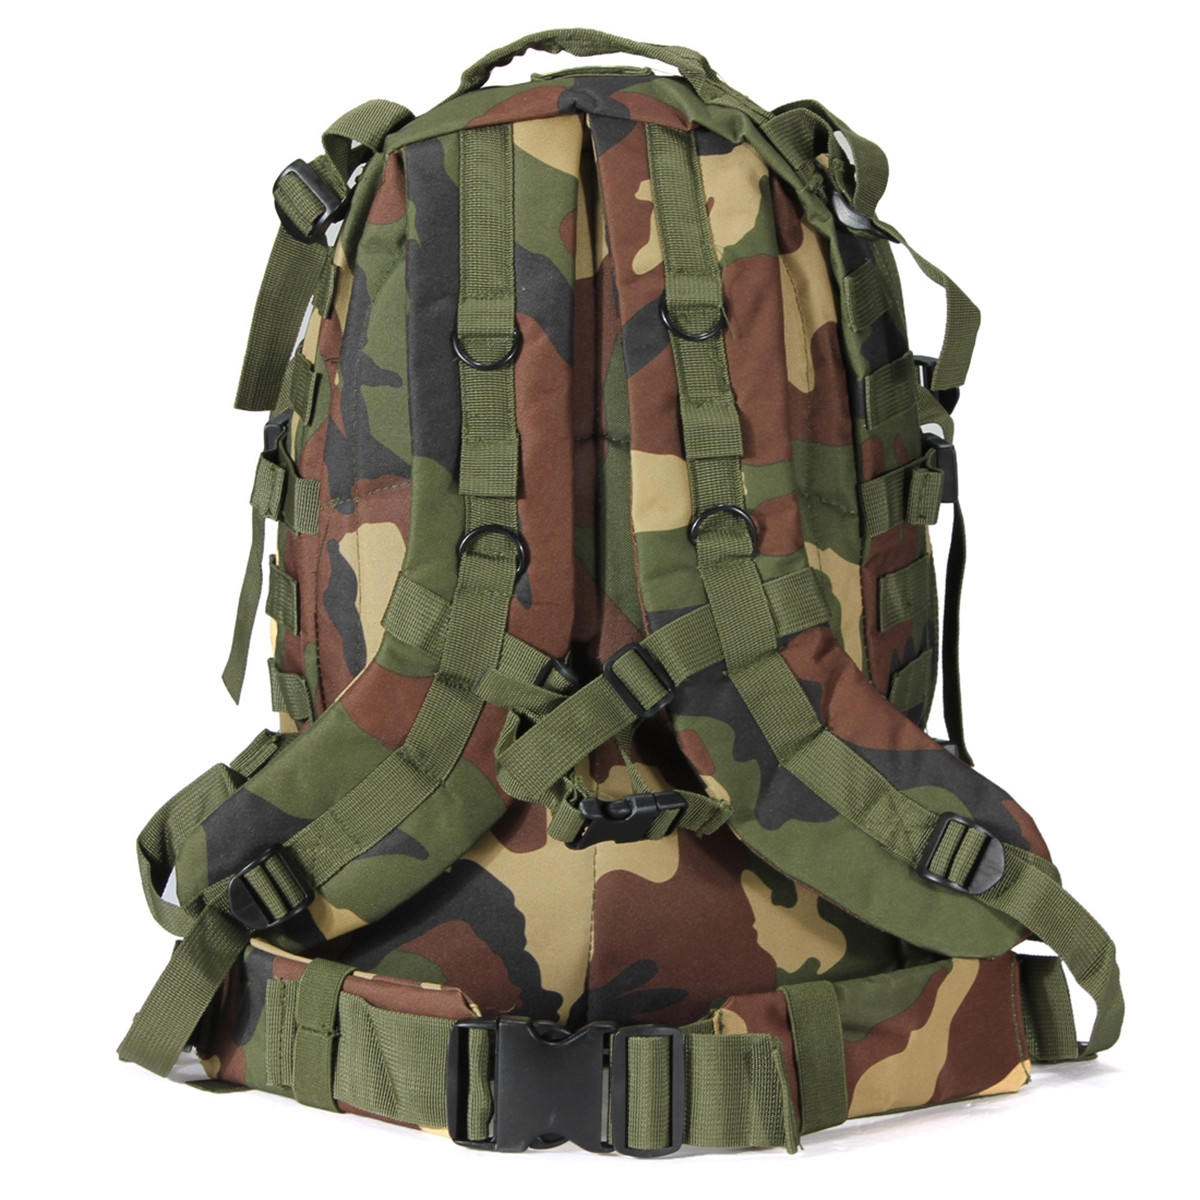 AMTOA-40L-3D-Outdoor-Molle-Military-Tactical-Rucksack-Backpack-Camping-Hiking-Bag-1817259-8